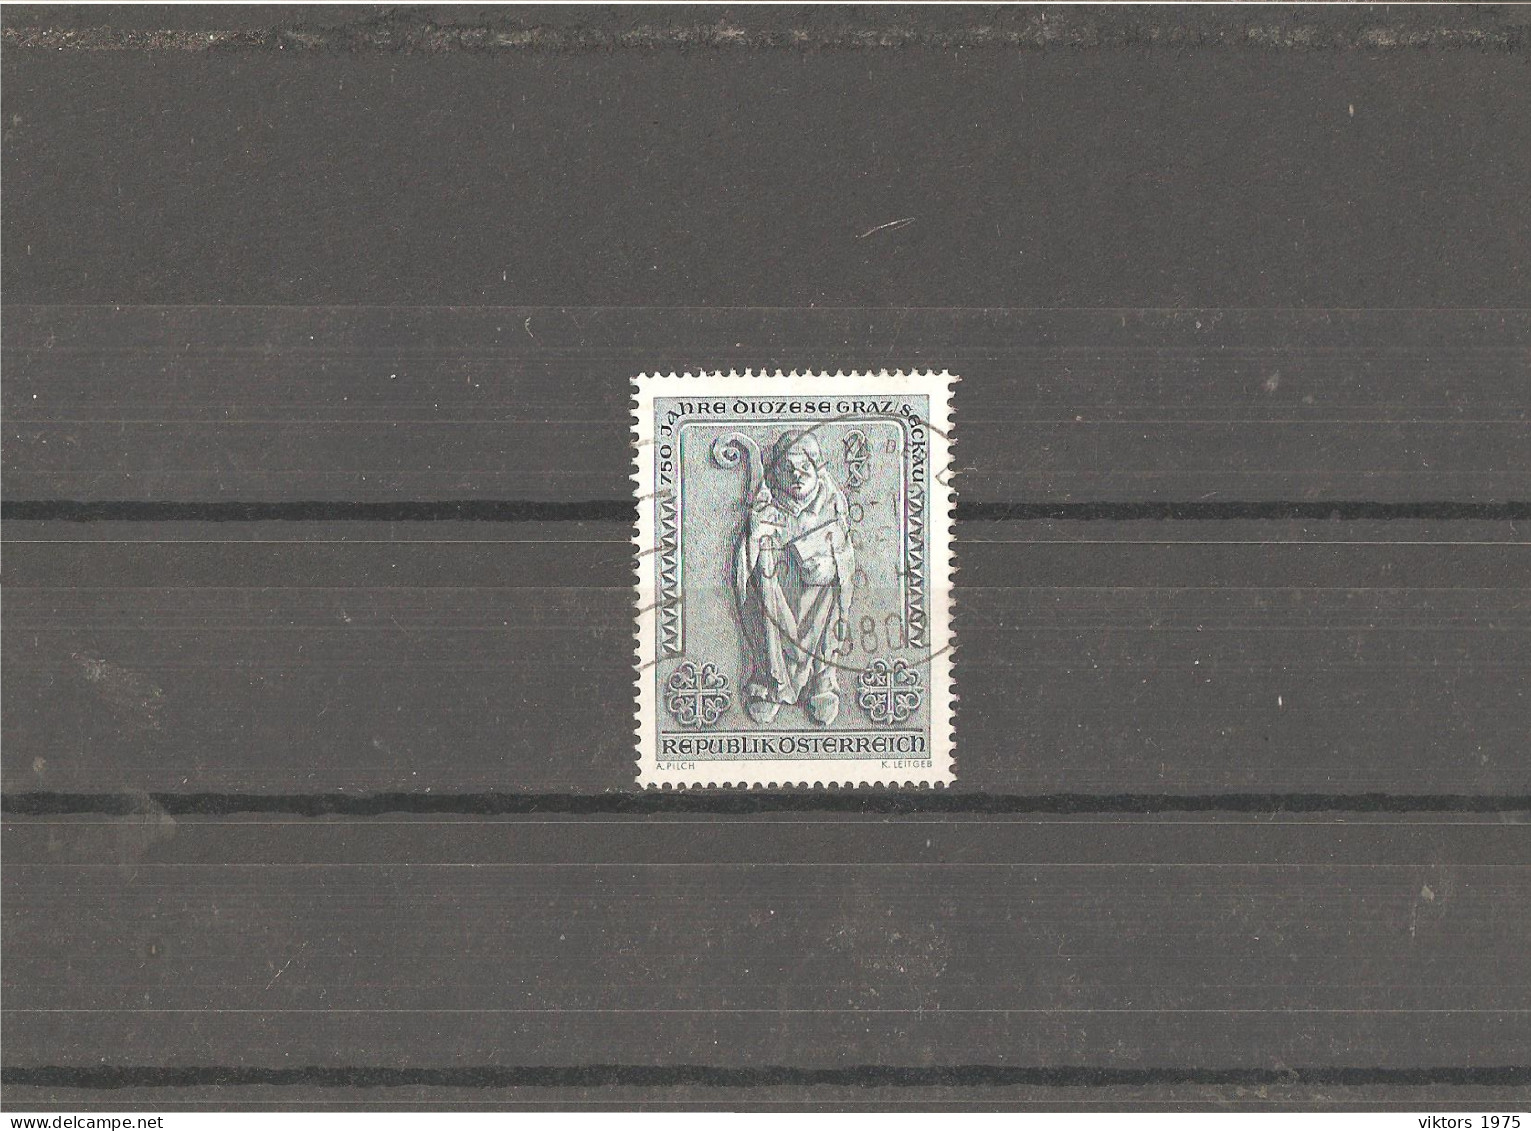 Used Stamp Nr.1270 In MICHEL Catalog - Used Stamps